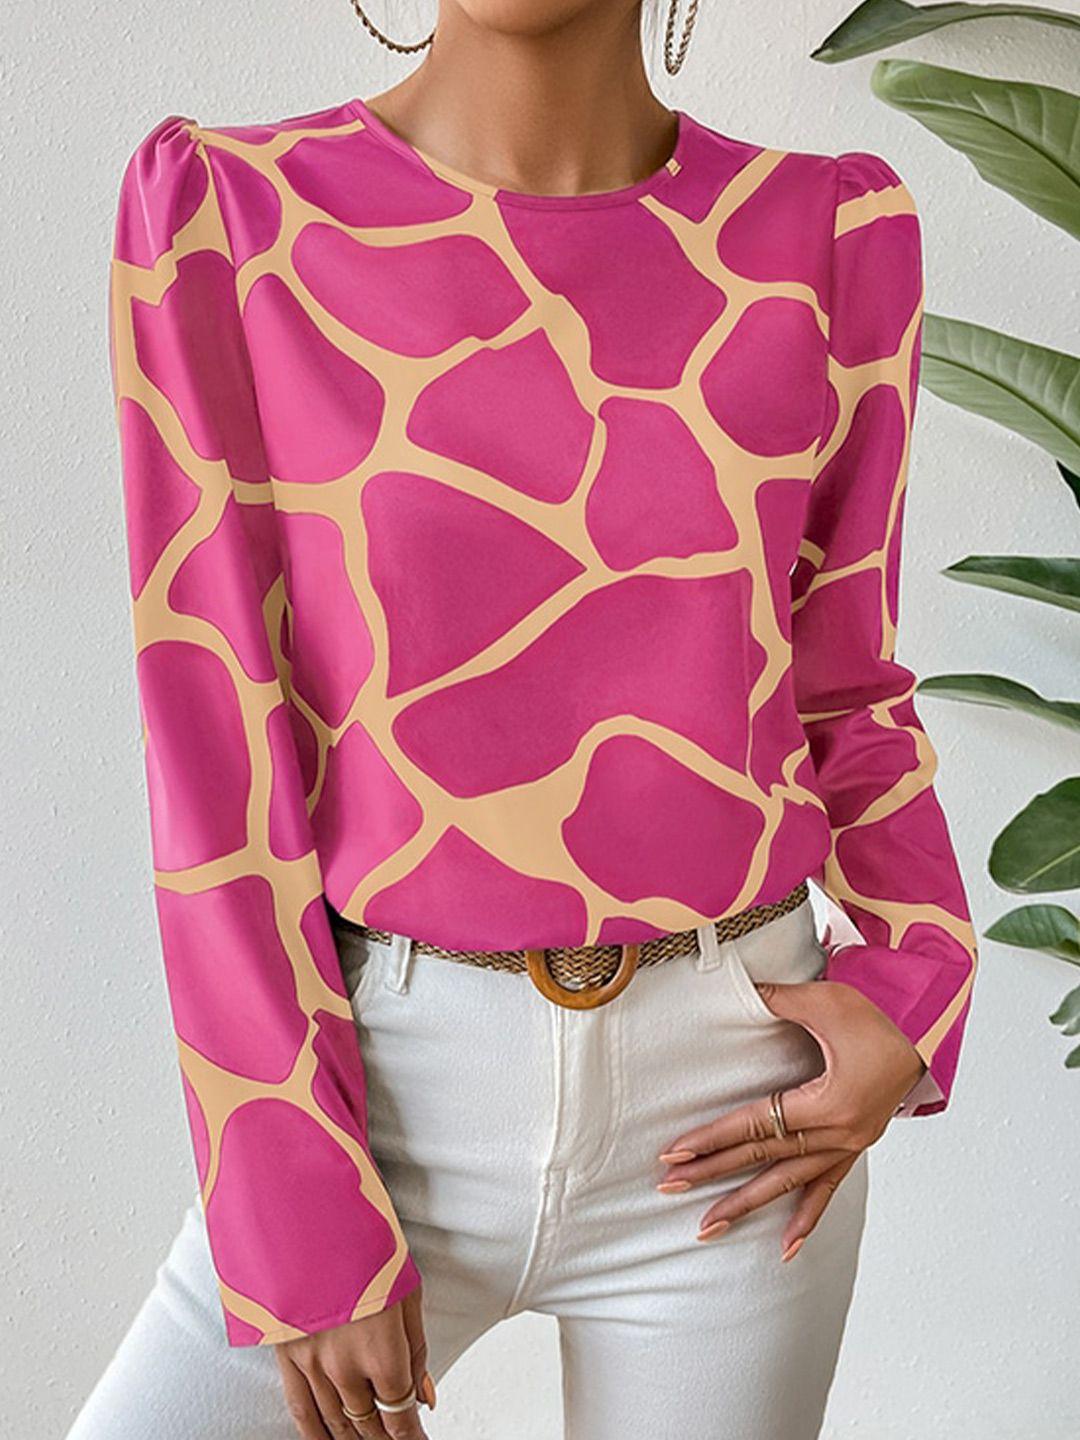 stylecast pink & cream round neck abstract printed cap sleeves regular top